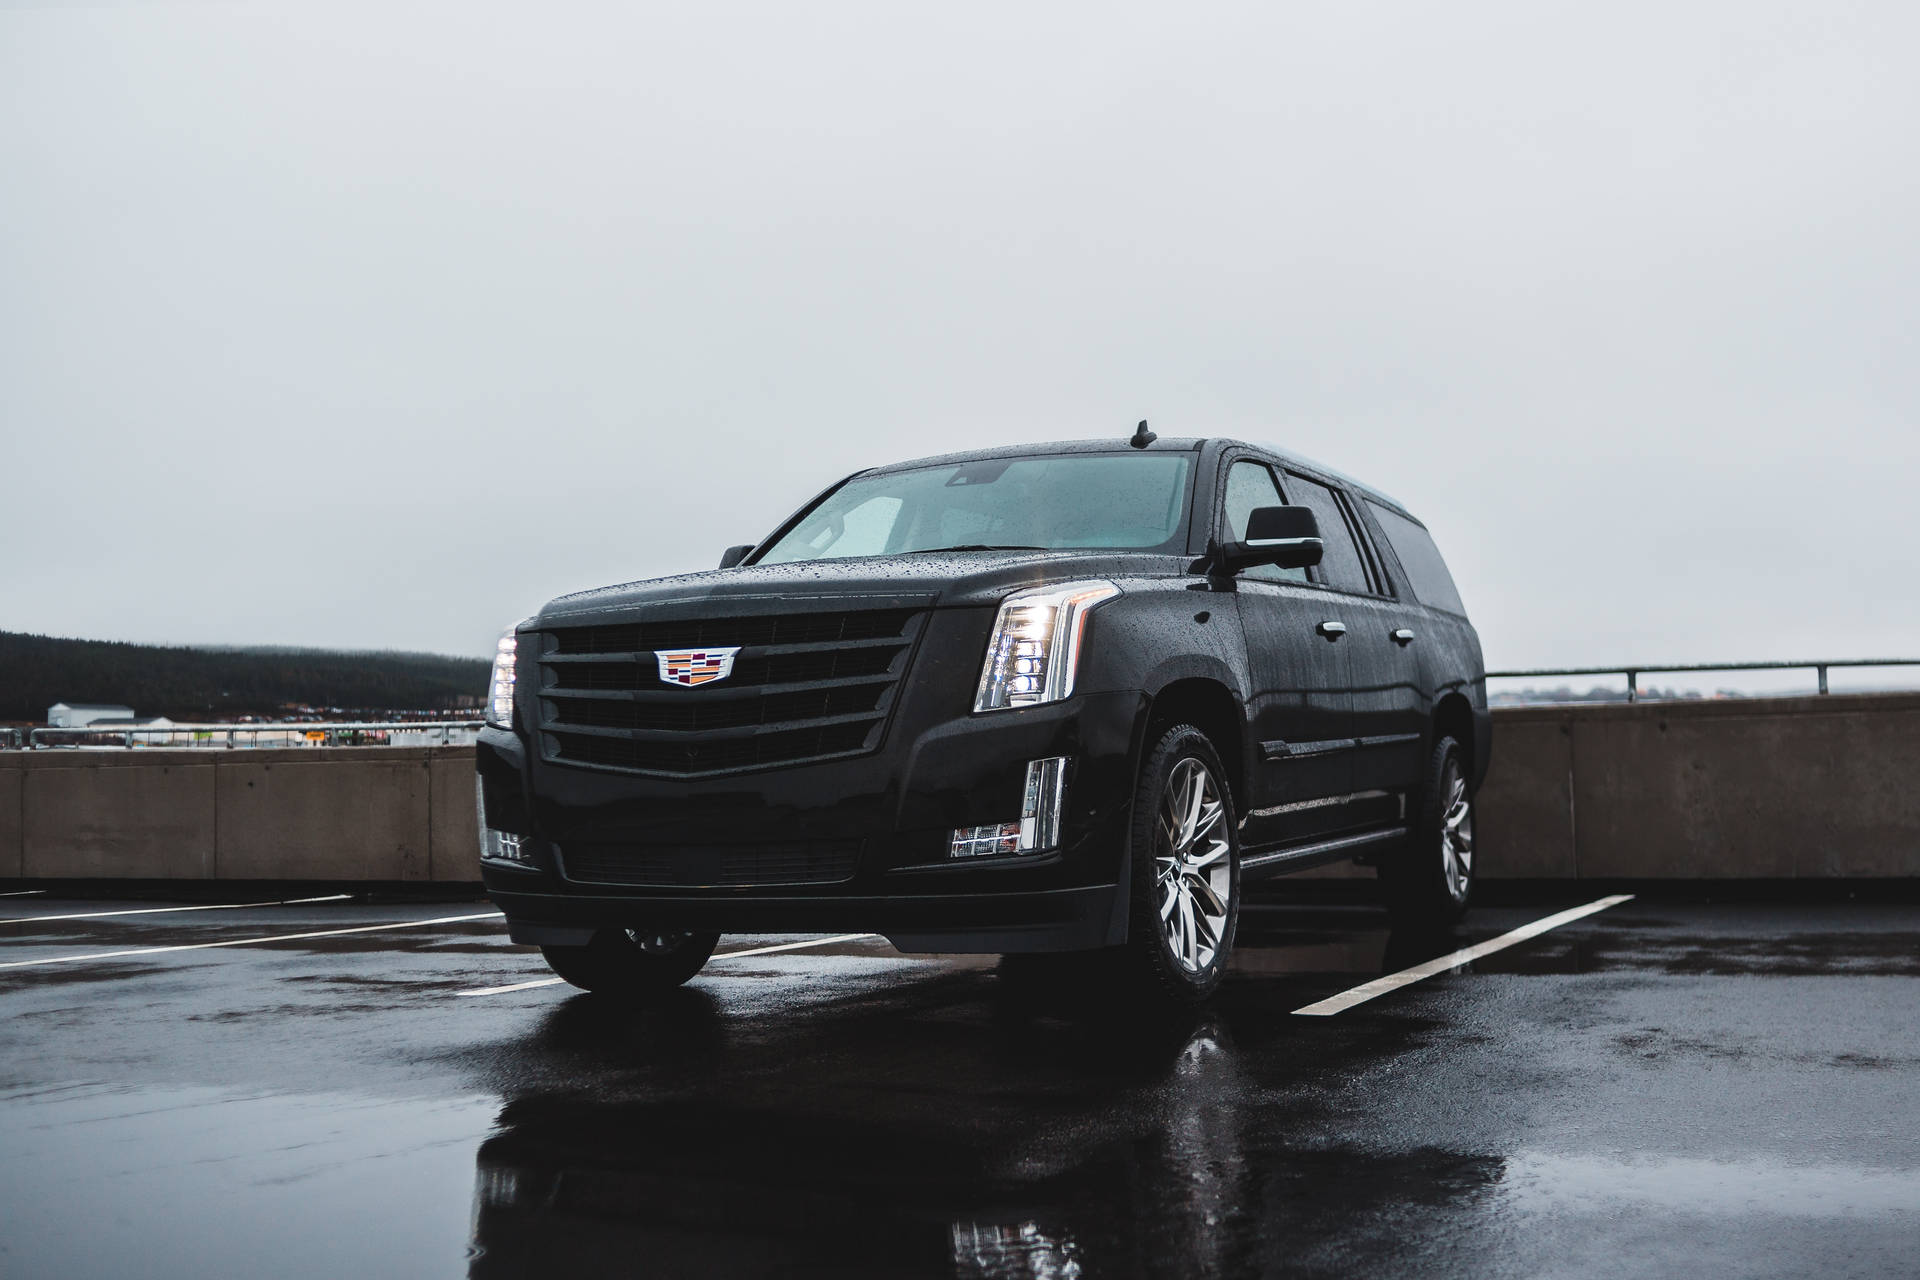 Free Cadillac Wallpaper Downloads, [100+] Cadillac Wallpapers for FREE |  